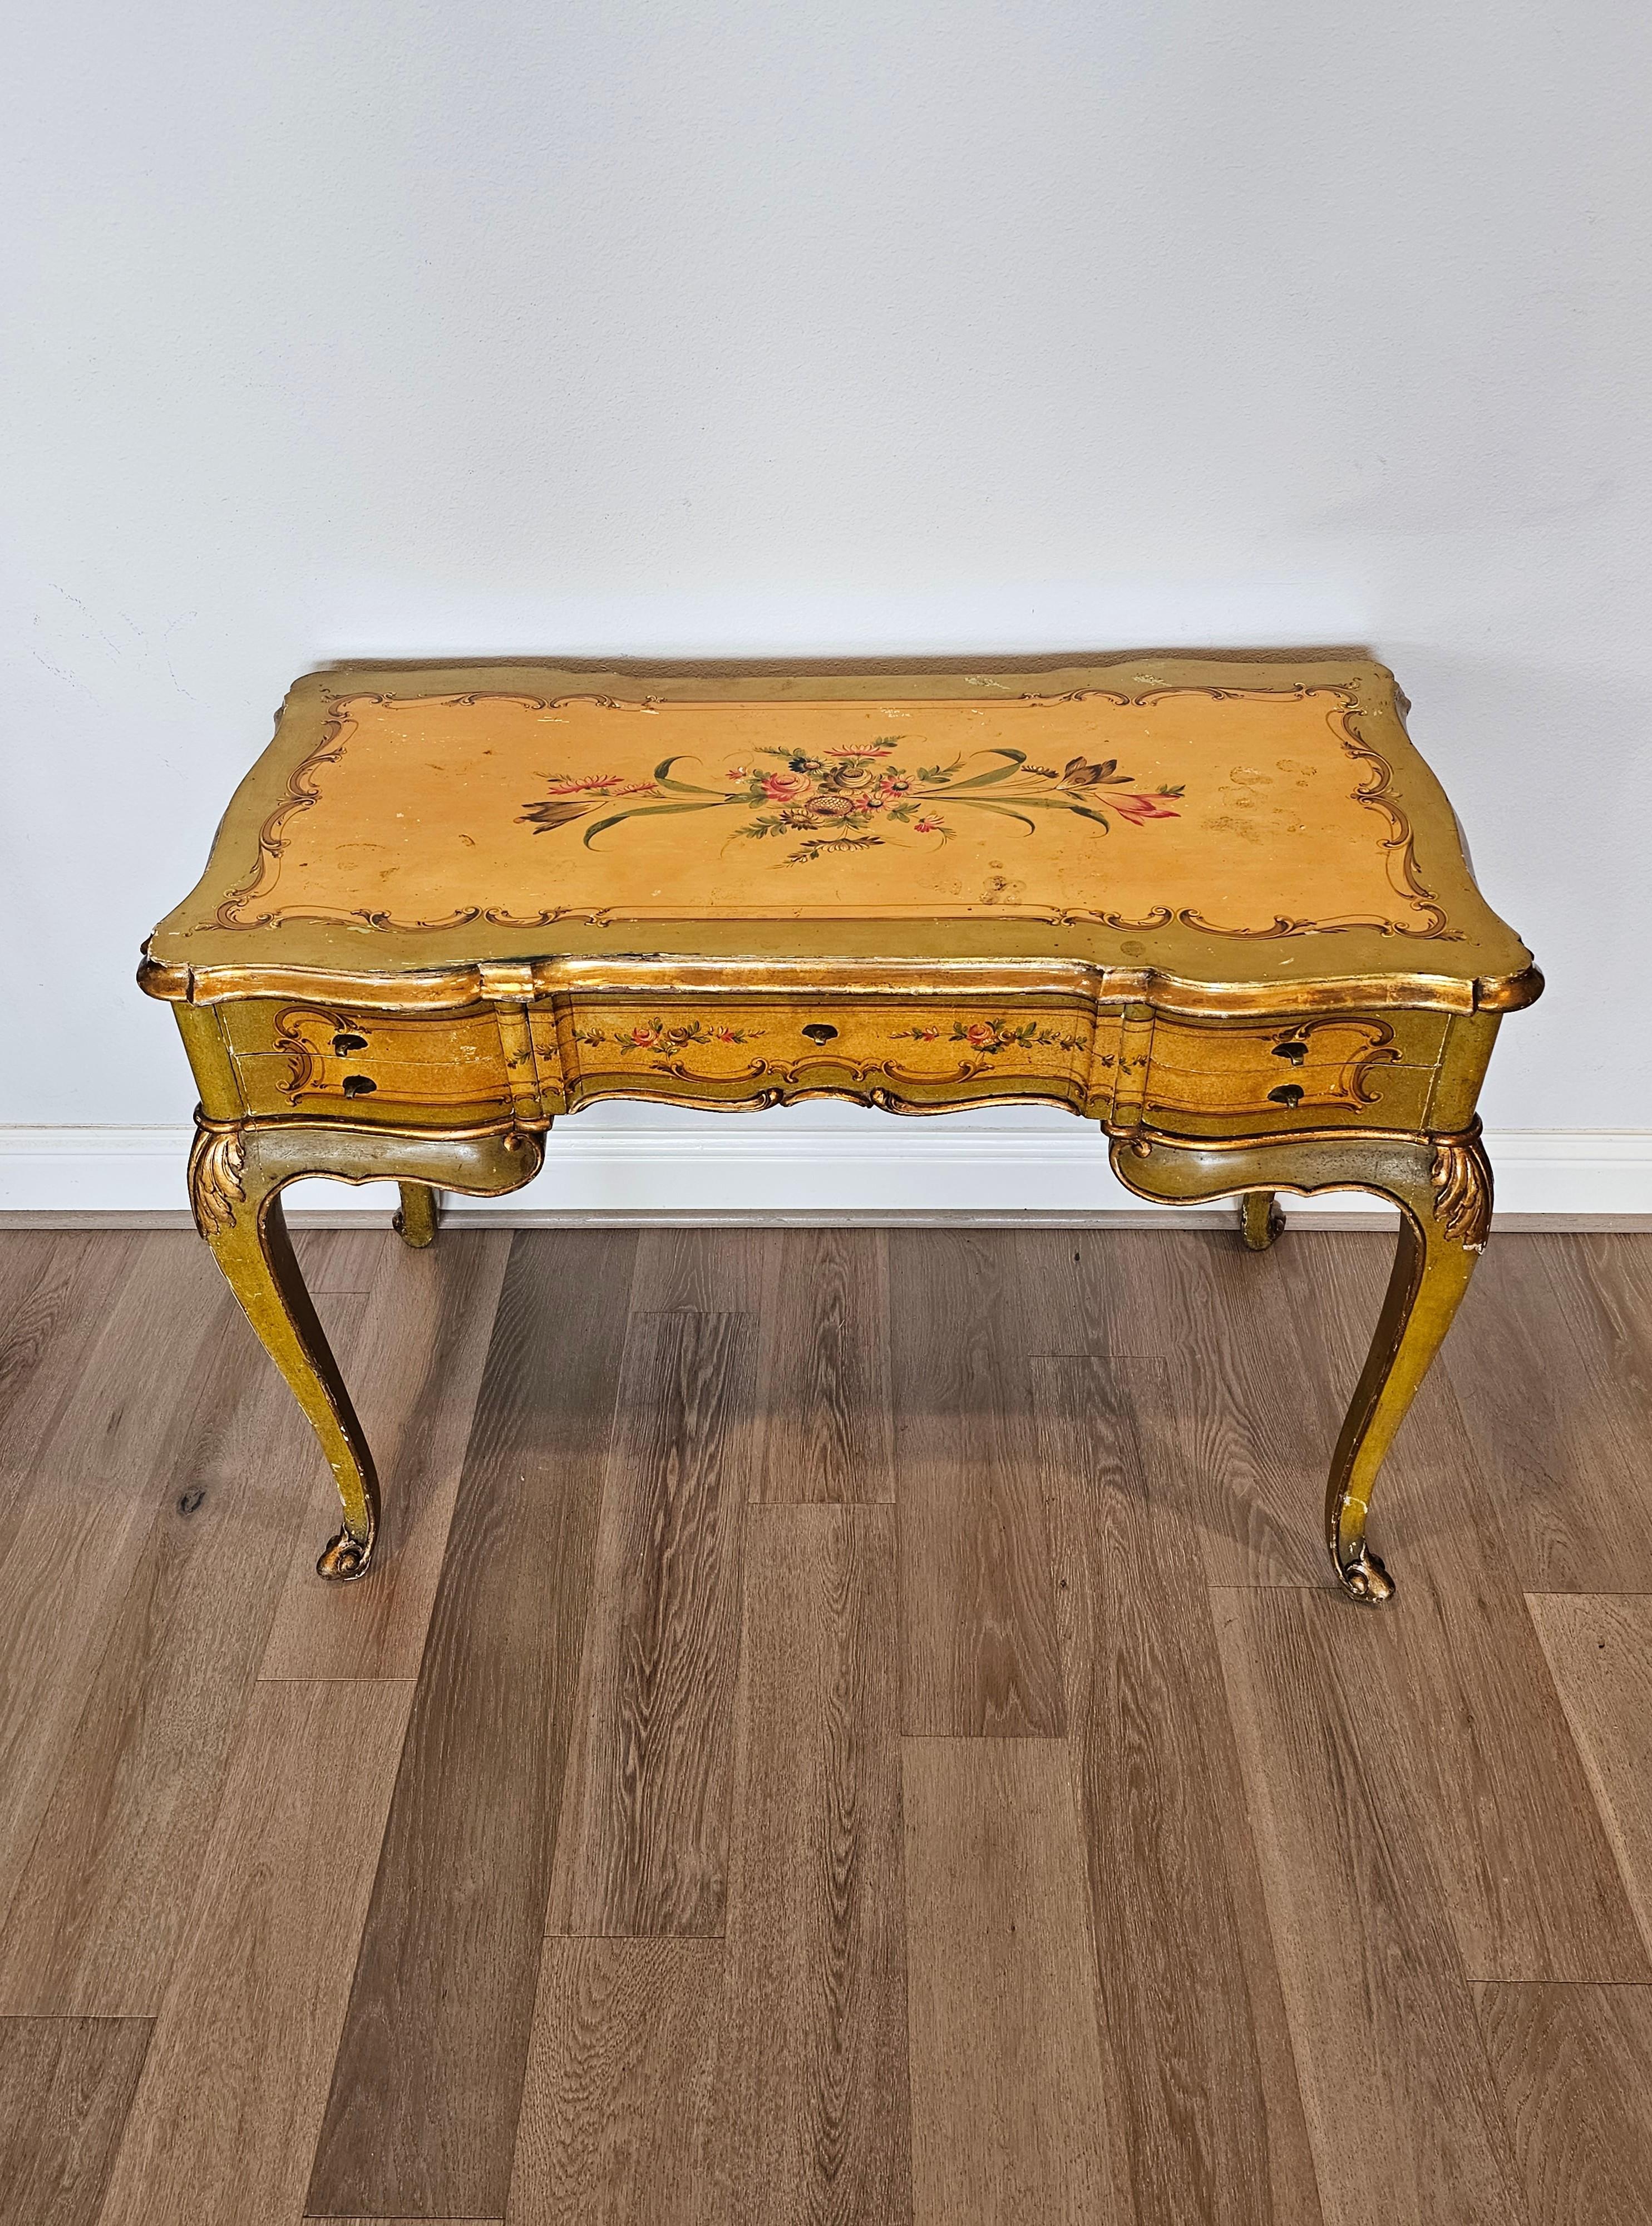 A most charming vintage, circa 1960, Italian Venetian writing table (desk - vanity - console) with beautifully aged heavily worn distressed patina.

Born in Italy in the mid-20th century, high-quality hand-crafted solid wood construction,